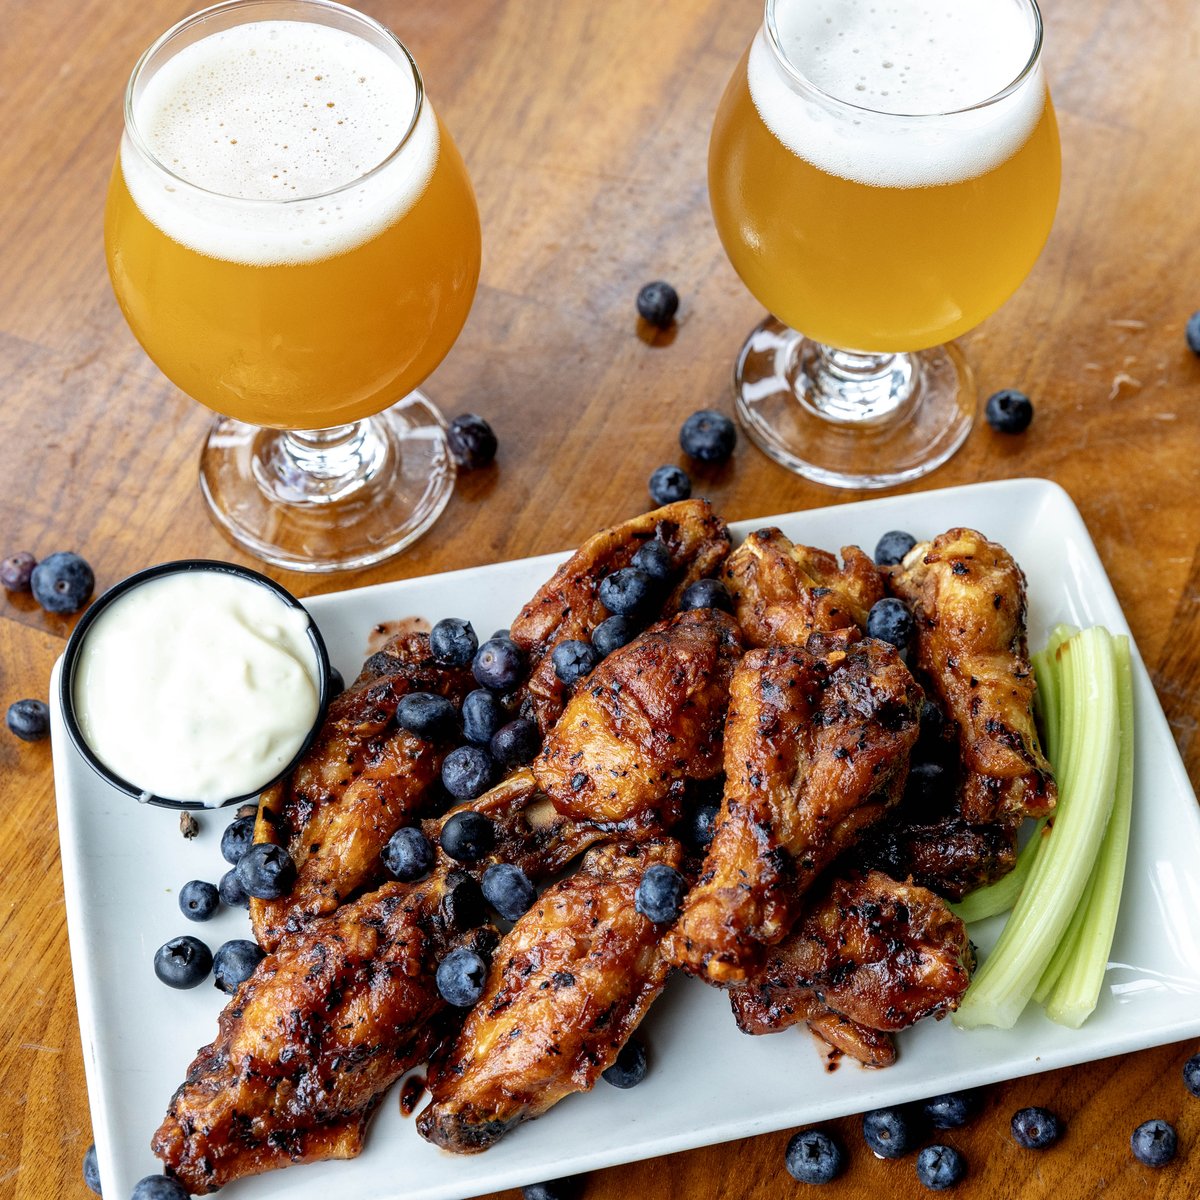 A little something for everyone today at Innovation Thursday! THE BEERS: Introducing NATURAL BLONDE Belgian-Style Blonde Ale! 6.2% ABV. (This will be around for awhile) We also have last week’s Apricot Pecan Parfait Sour. THE WINGS: Chipotle Blueberry BBQ. Today only!